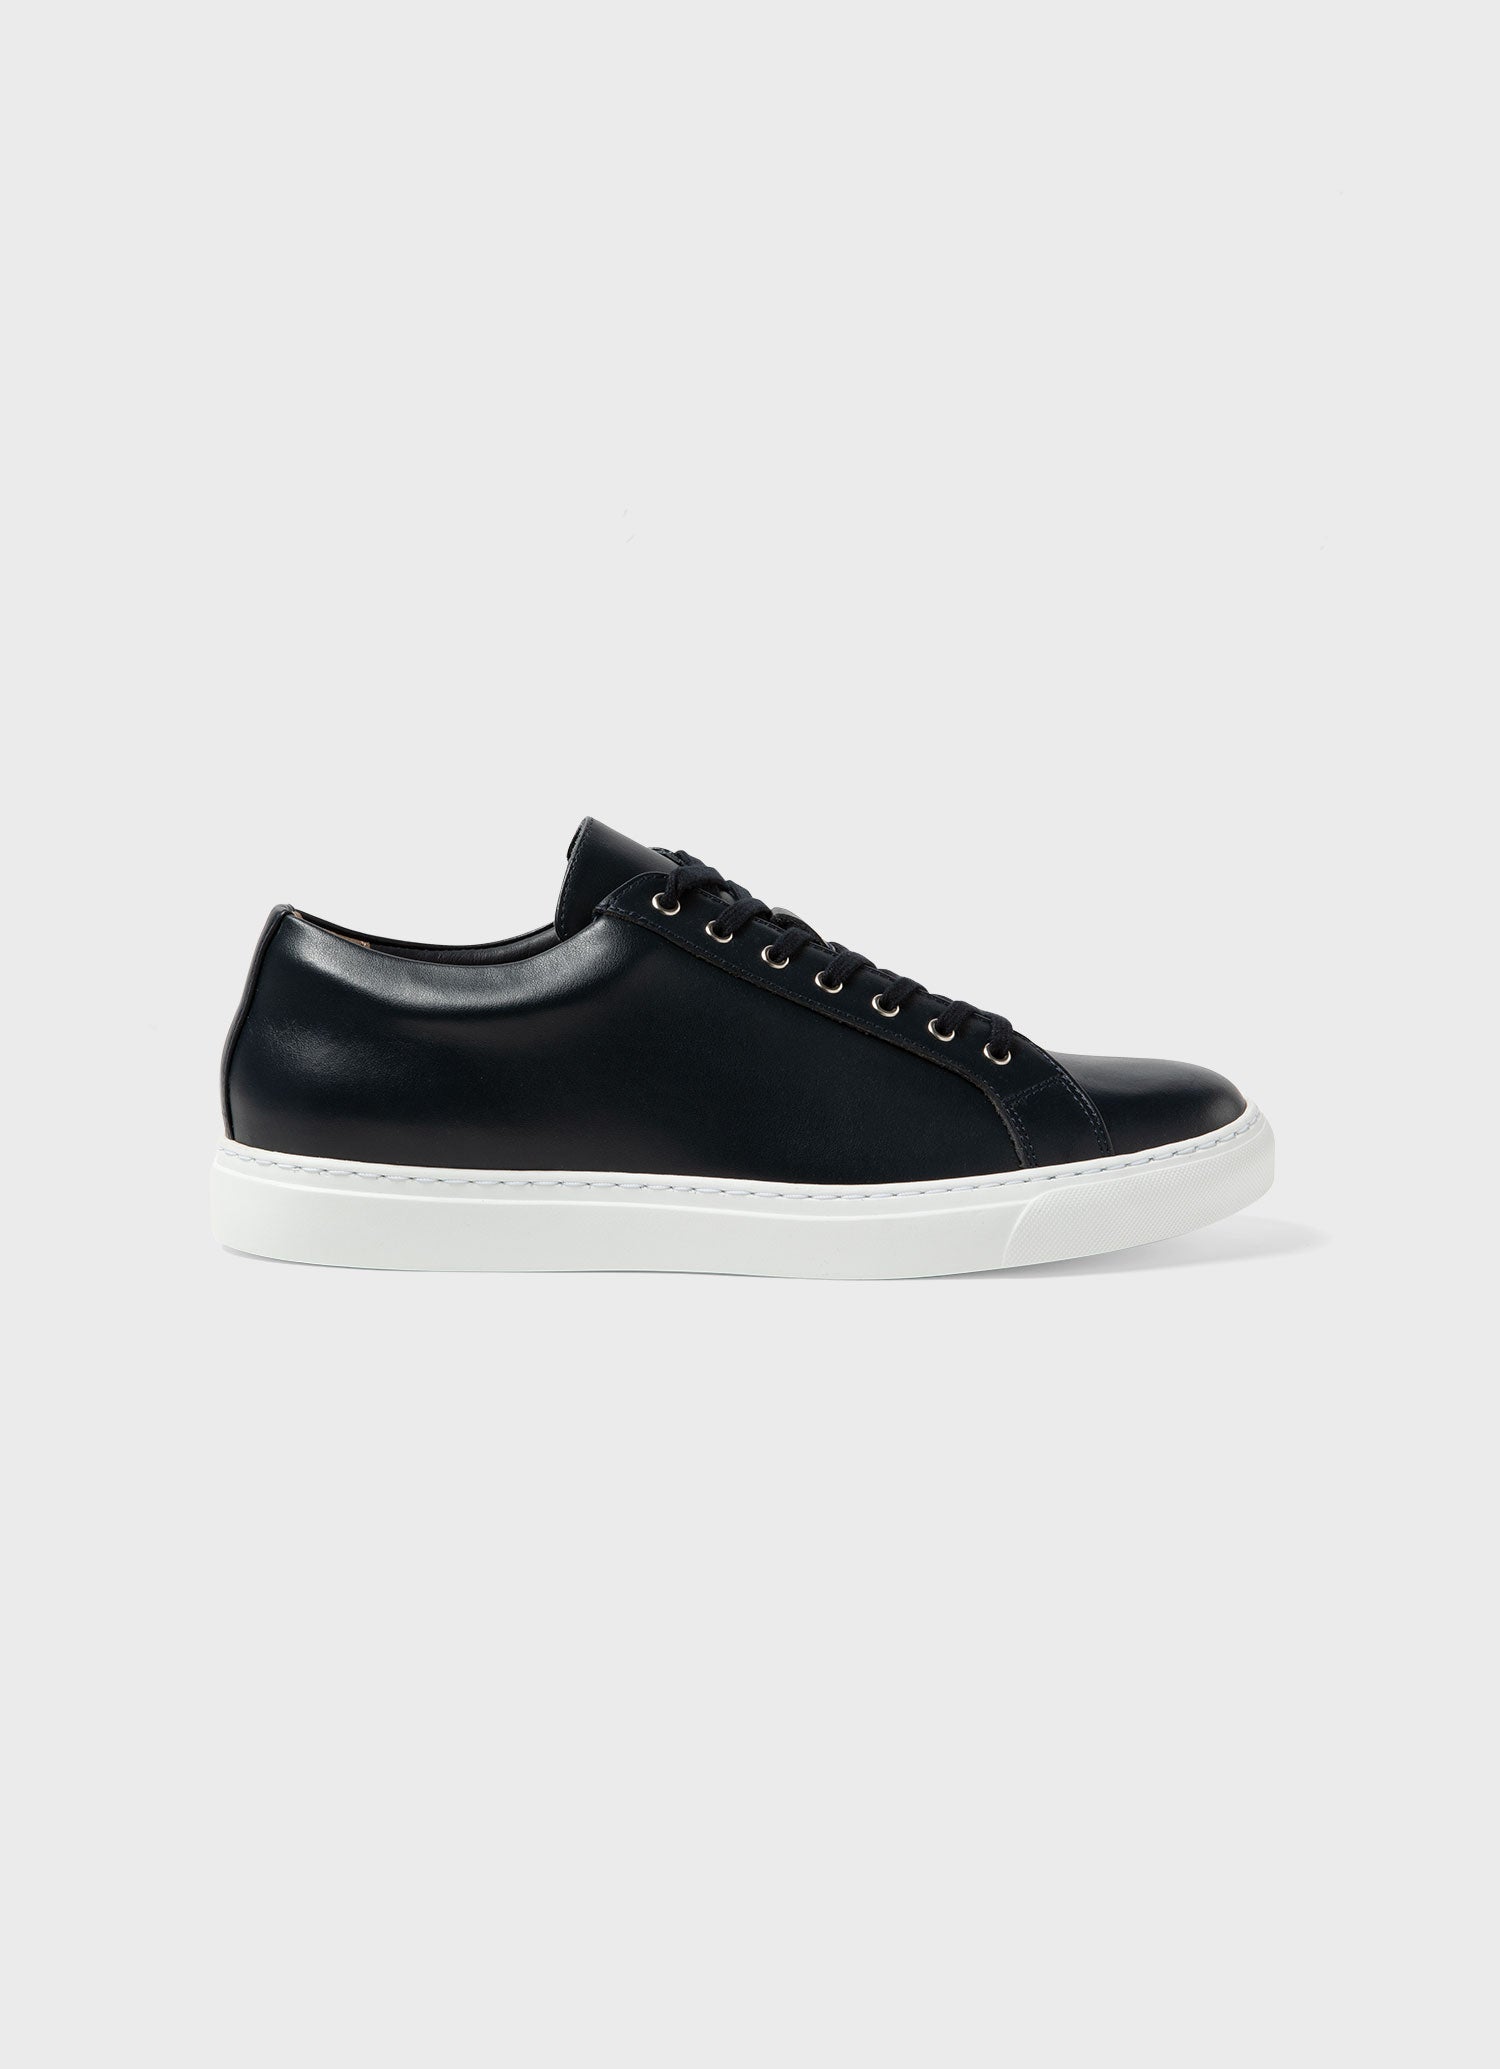 Men's Leather Tennis Shoes in Navy